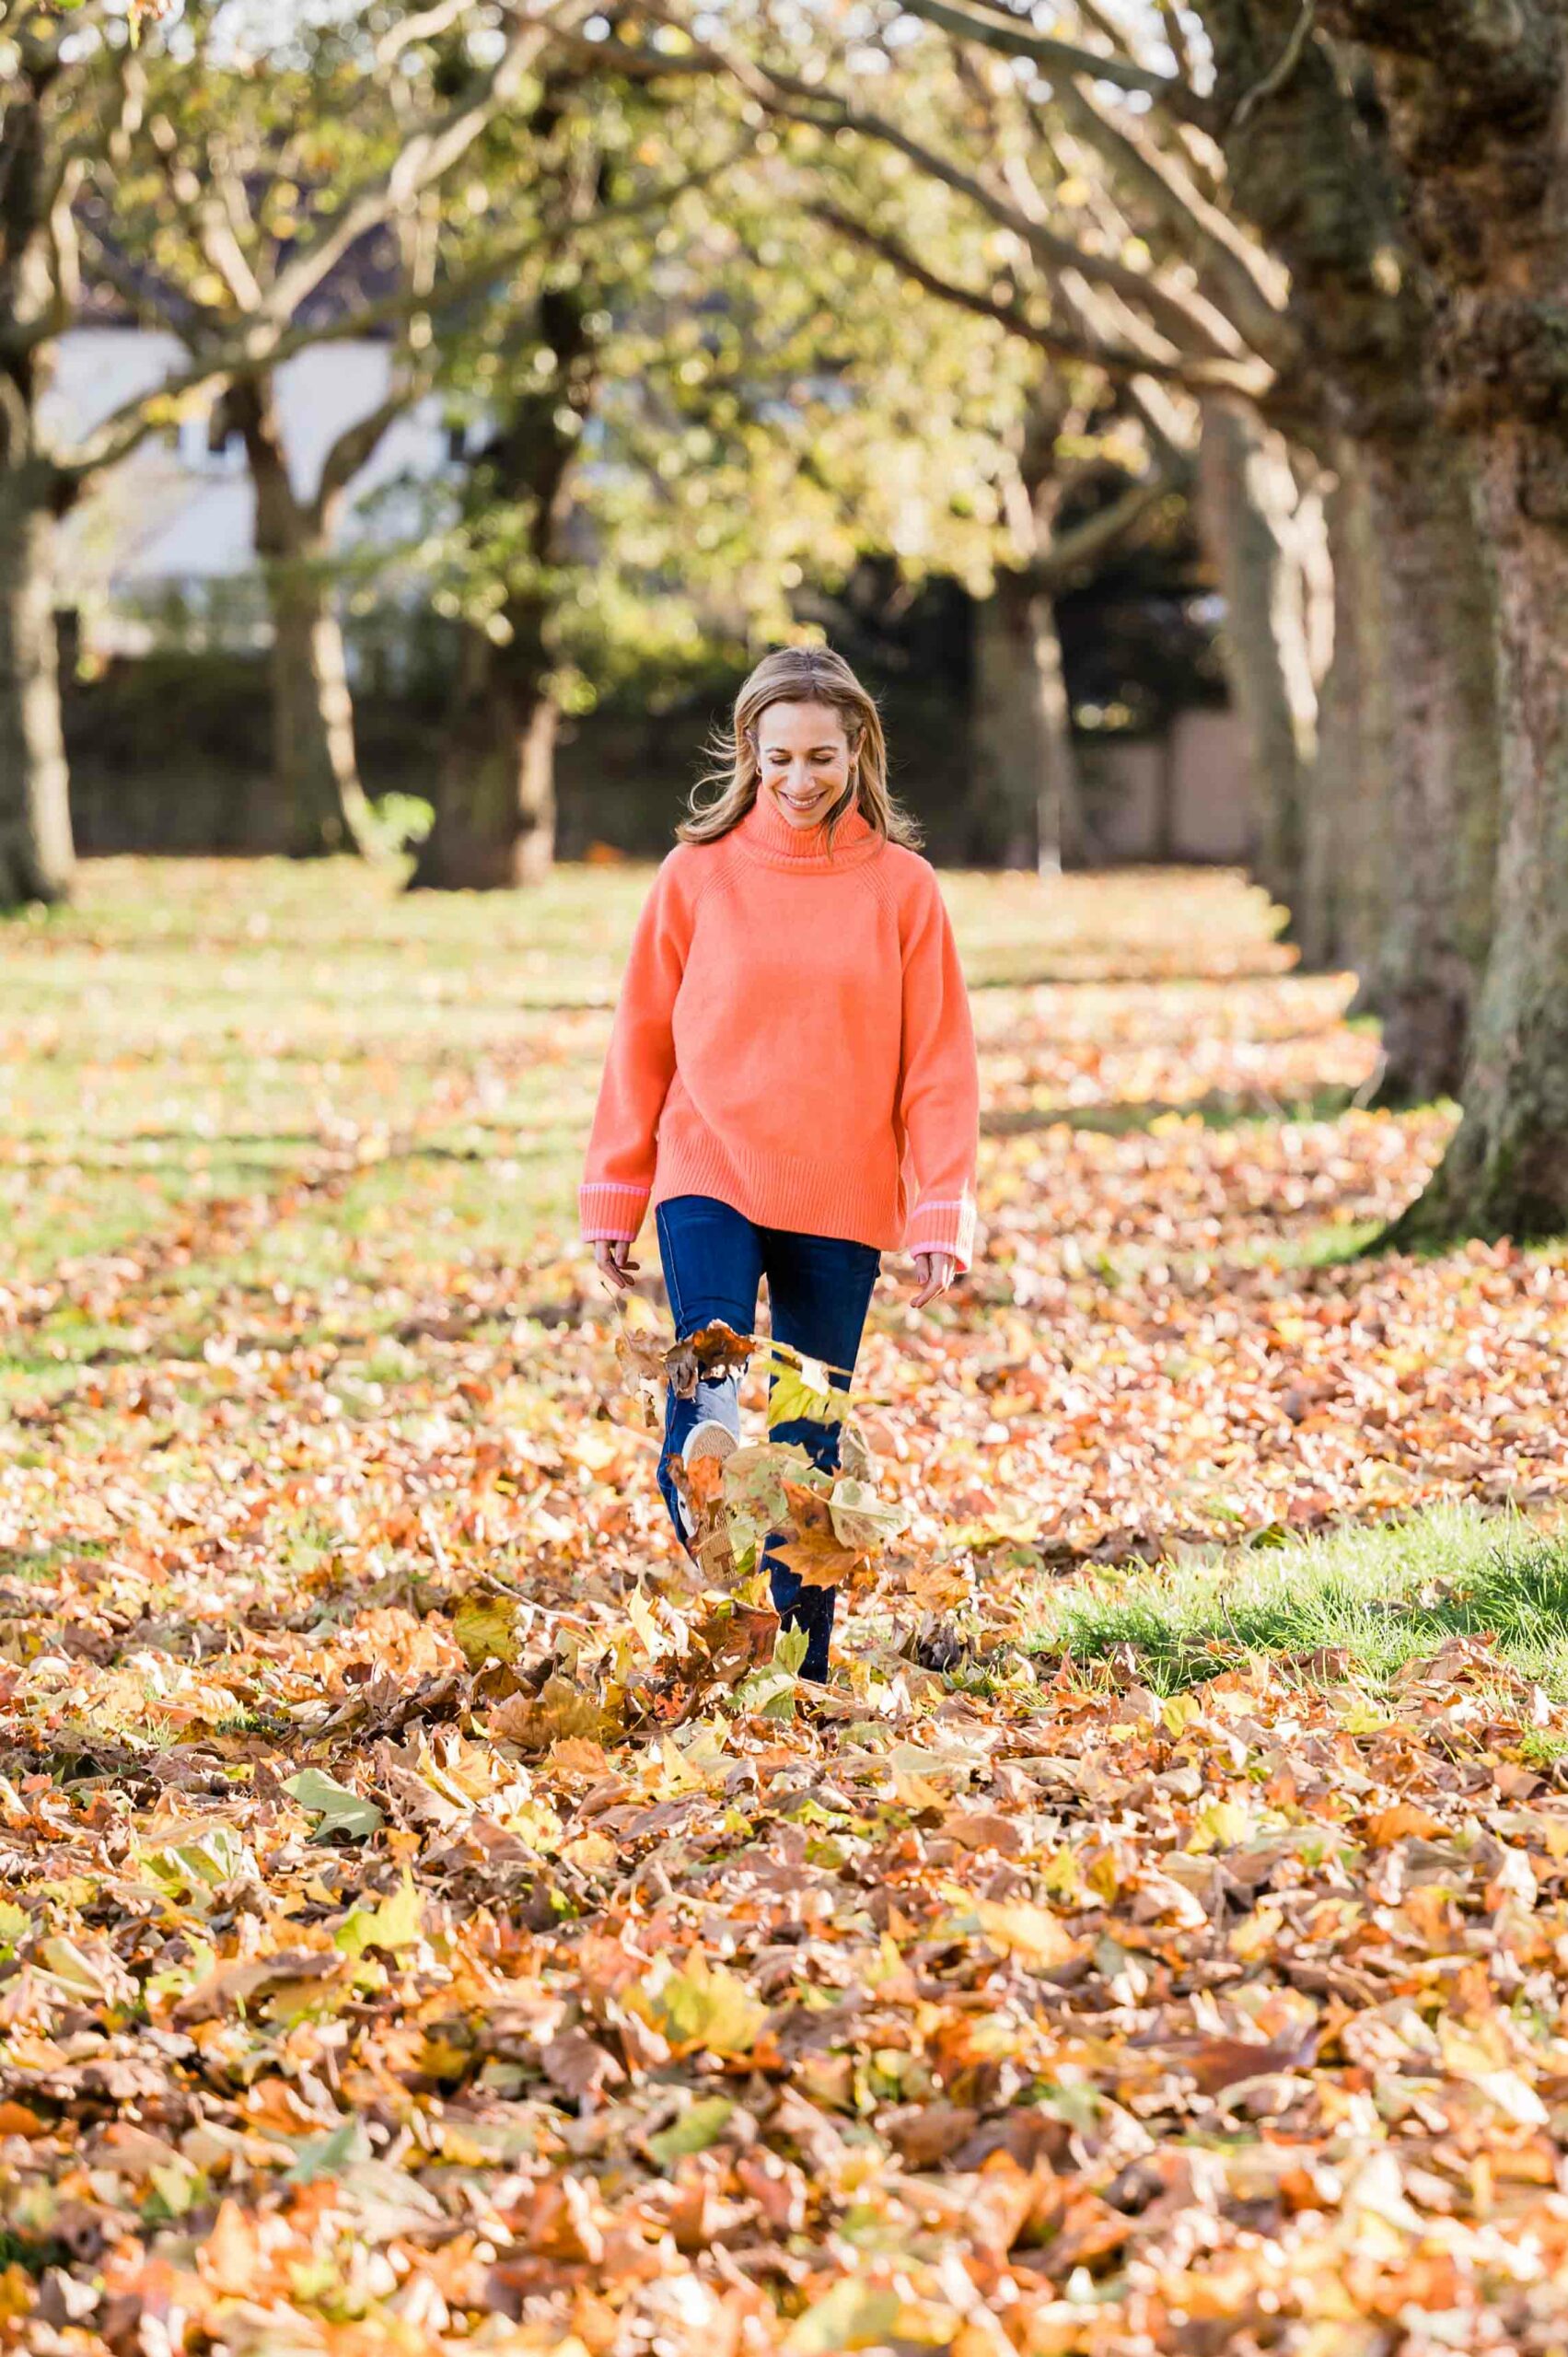 Smiling woman kicking through the autumn leaves in a London park